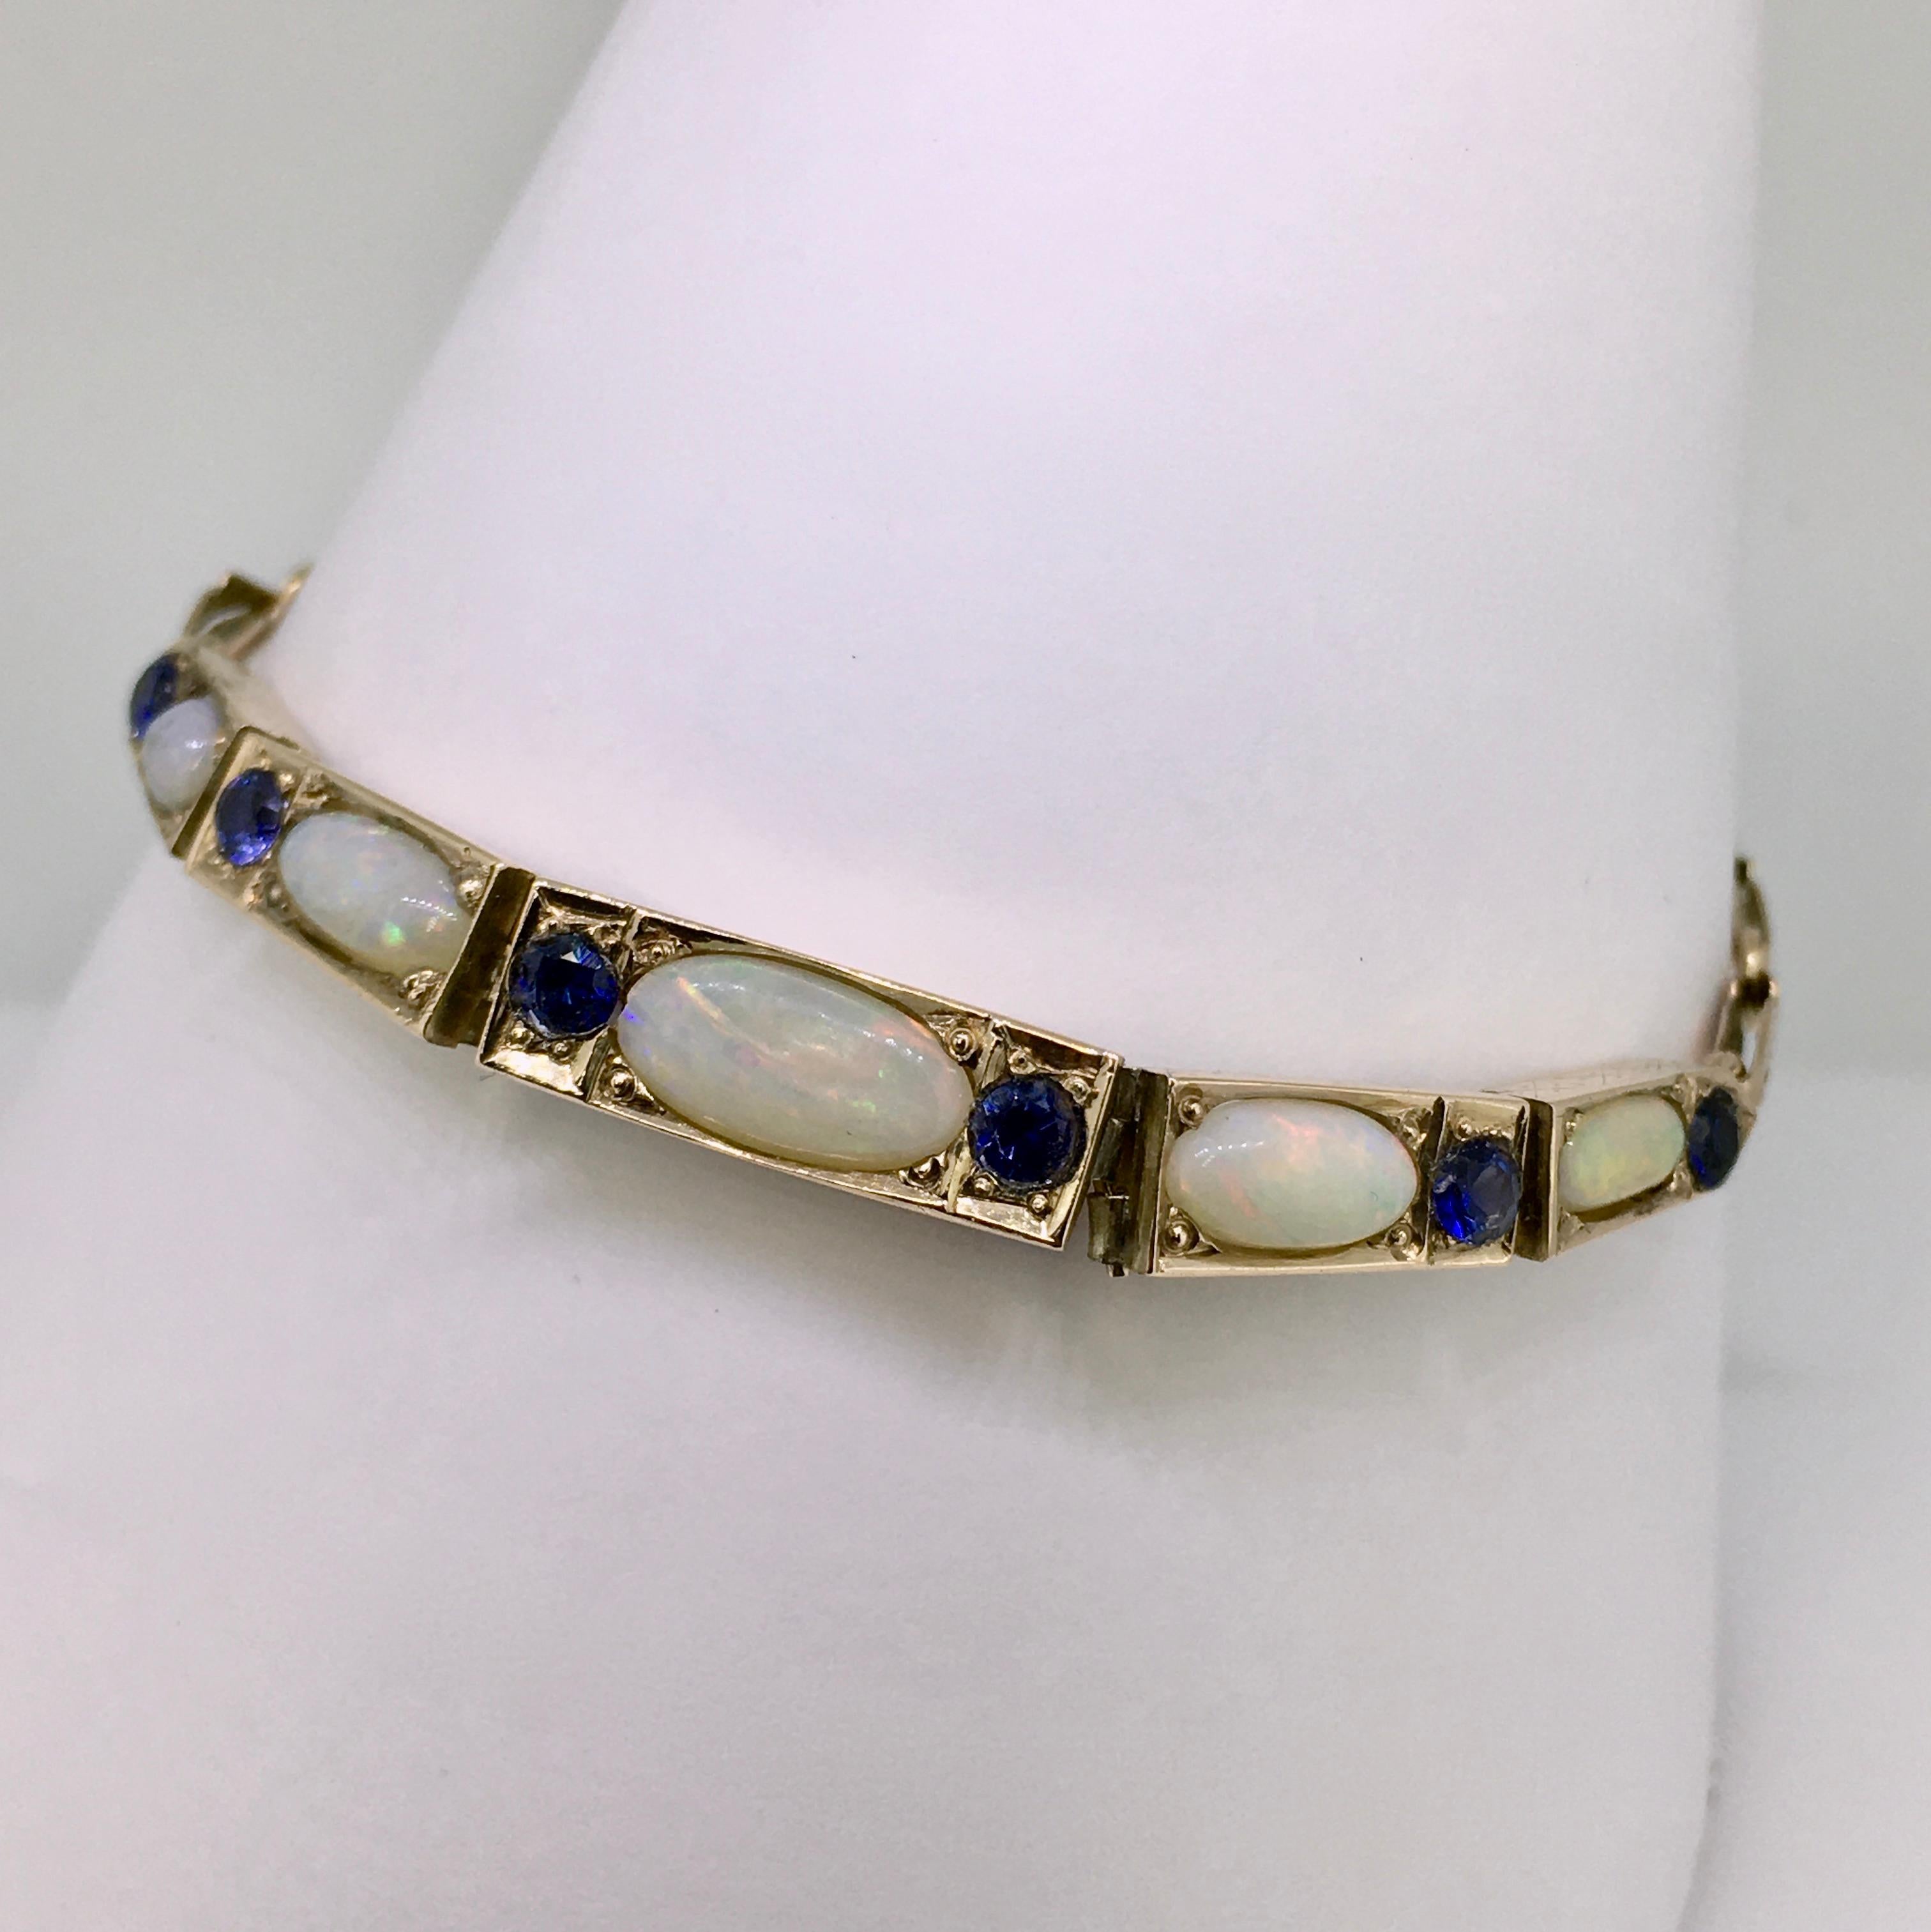 Yellow and pink gold bracelet, Late Art Deco style, set with Sapphire and White opal. 
The bracelet is in original condition, and has a warm patina, shown the warm pink gold links. 
A sparkling combination of the blue sapphires, opal and the pink